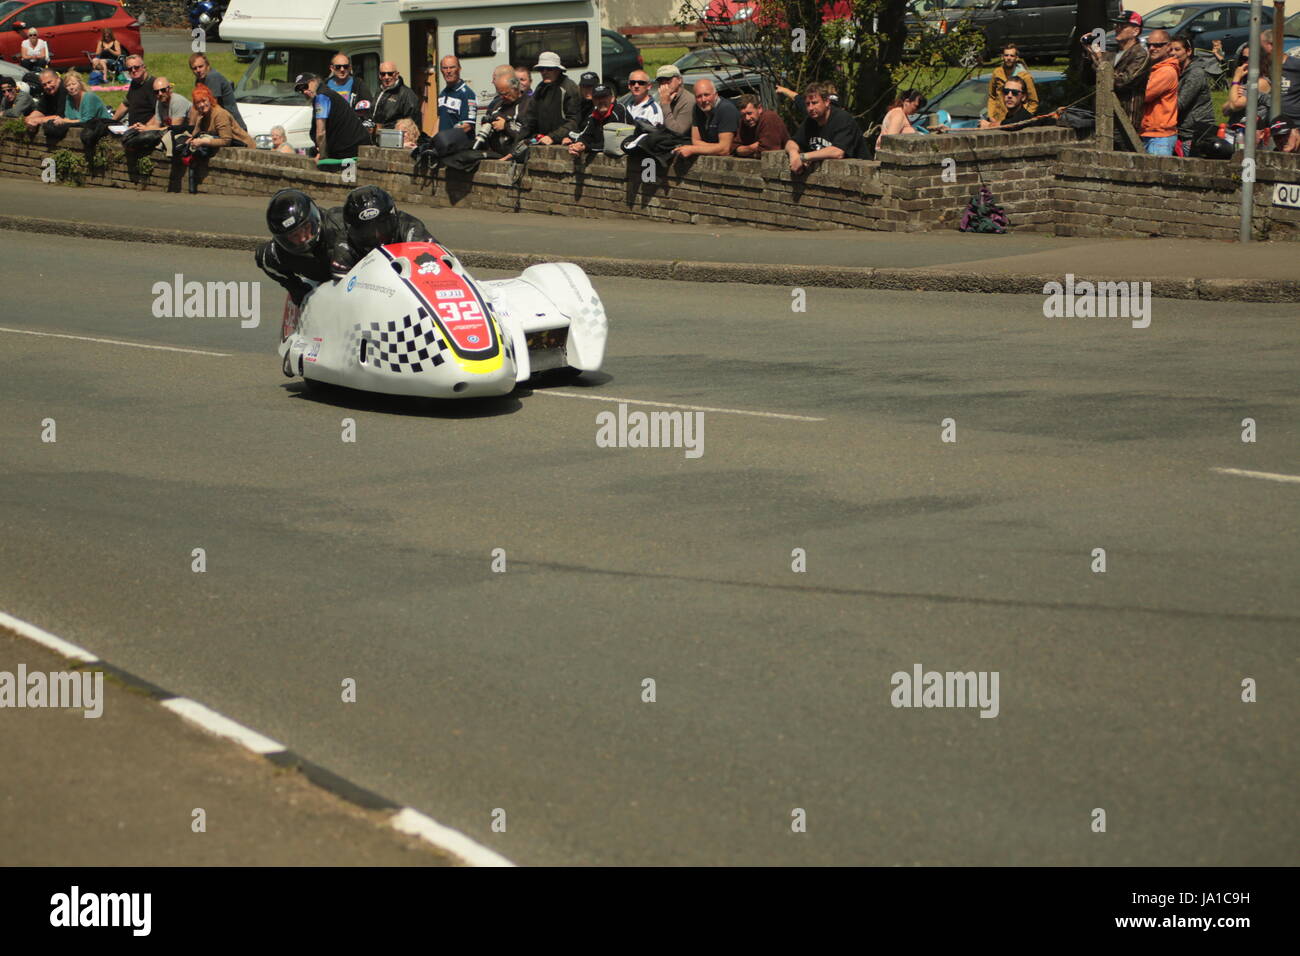 Isle of Man TT Races, Sidecar, Supersport/Lightweight/Newcomers (all classes), Qualifying Session and Practice Race. Saturday, 3 June 2017 at Cruickshank's Corner, Ramsey, Isle of Man Credit: Eclectic Art and Photography/Alamy Live News Stock Photo